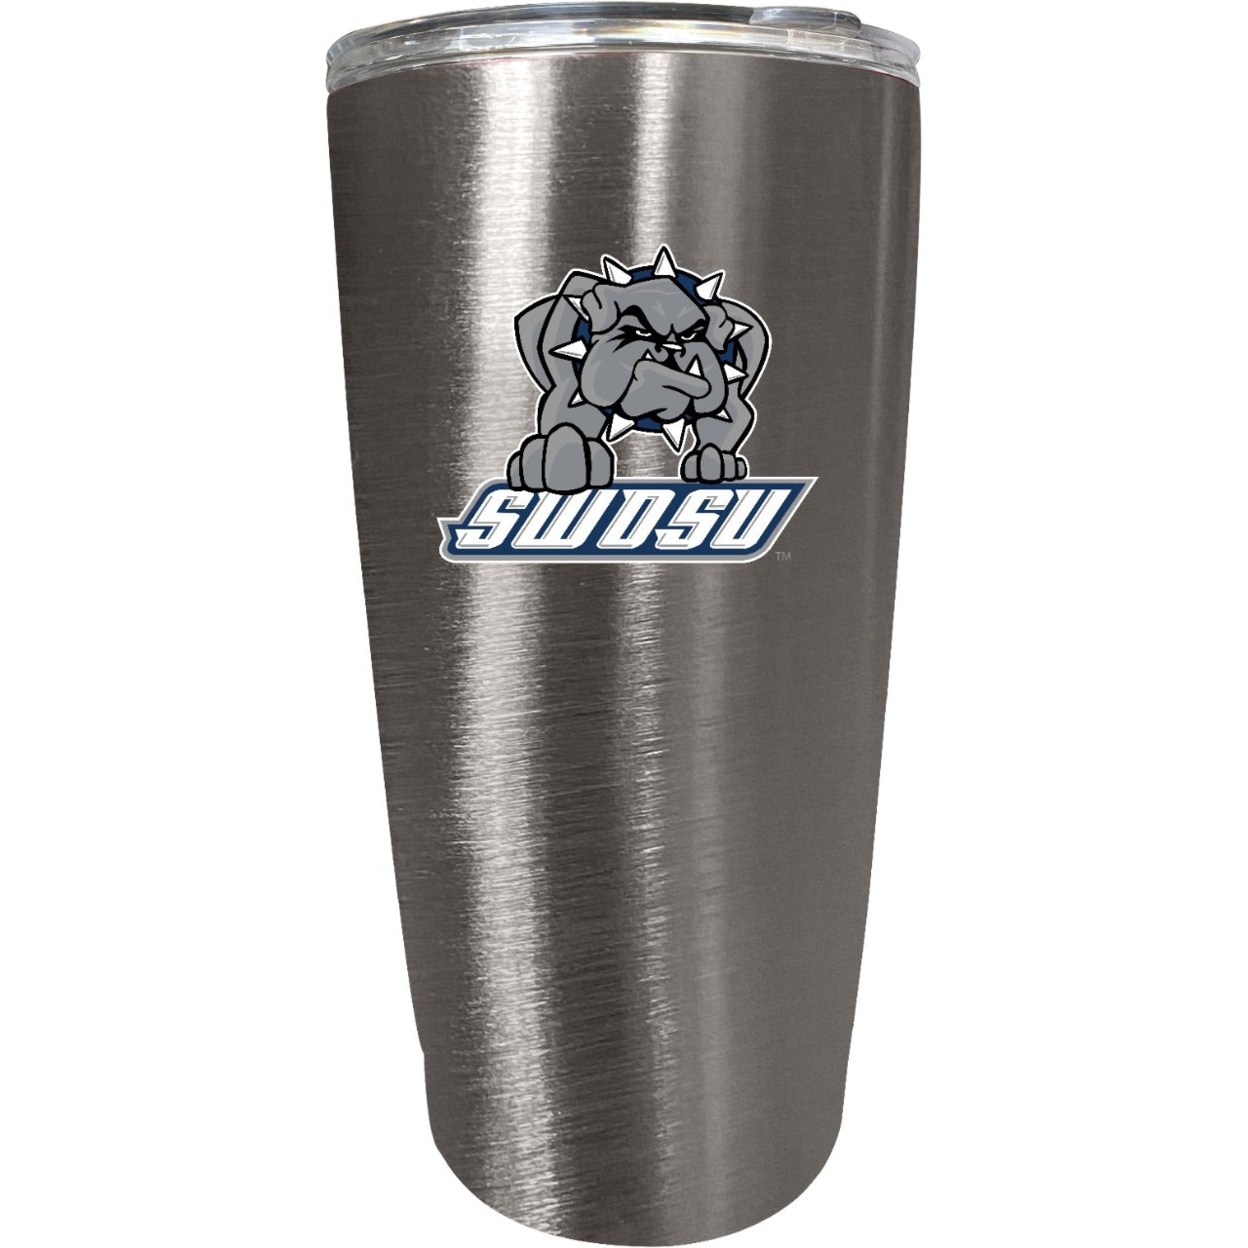 Southwestern Oklahoma State University 16 Oz Insulated Stainless Steel Tumbler Colorless